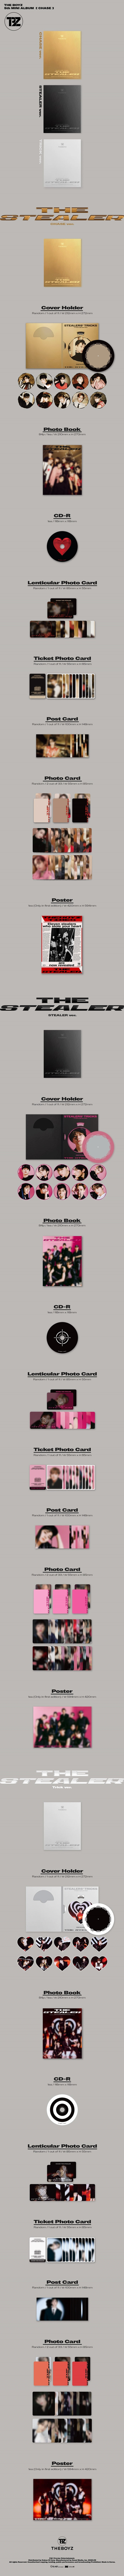 1 CD
1 Photo Book (84 pages)
1 Lenticular Photo Card
1 Ticket Photo Card
1 Post
2 Photo Cards